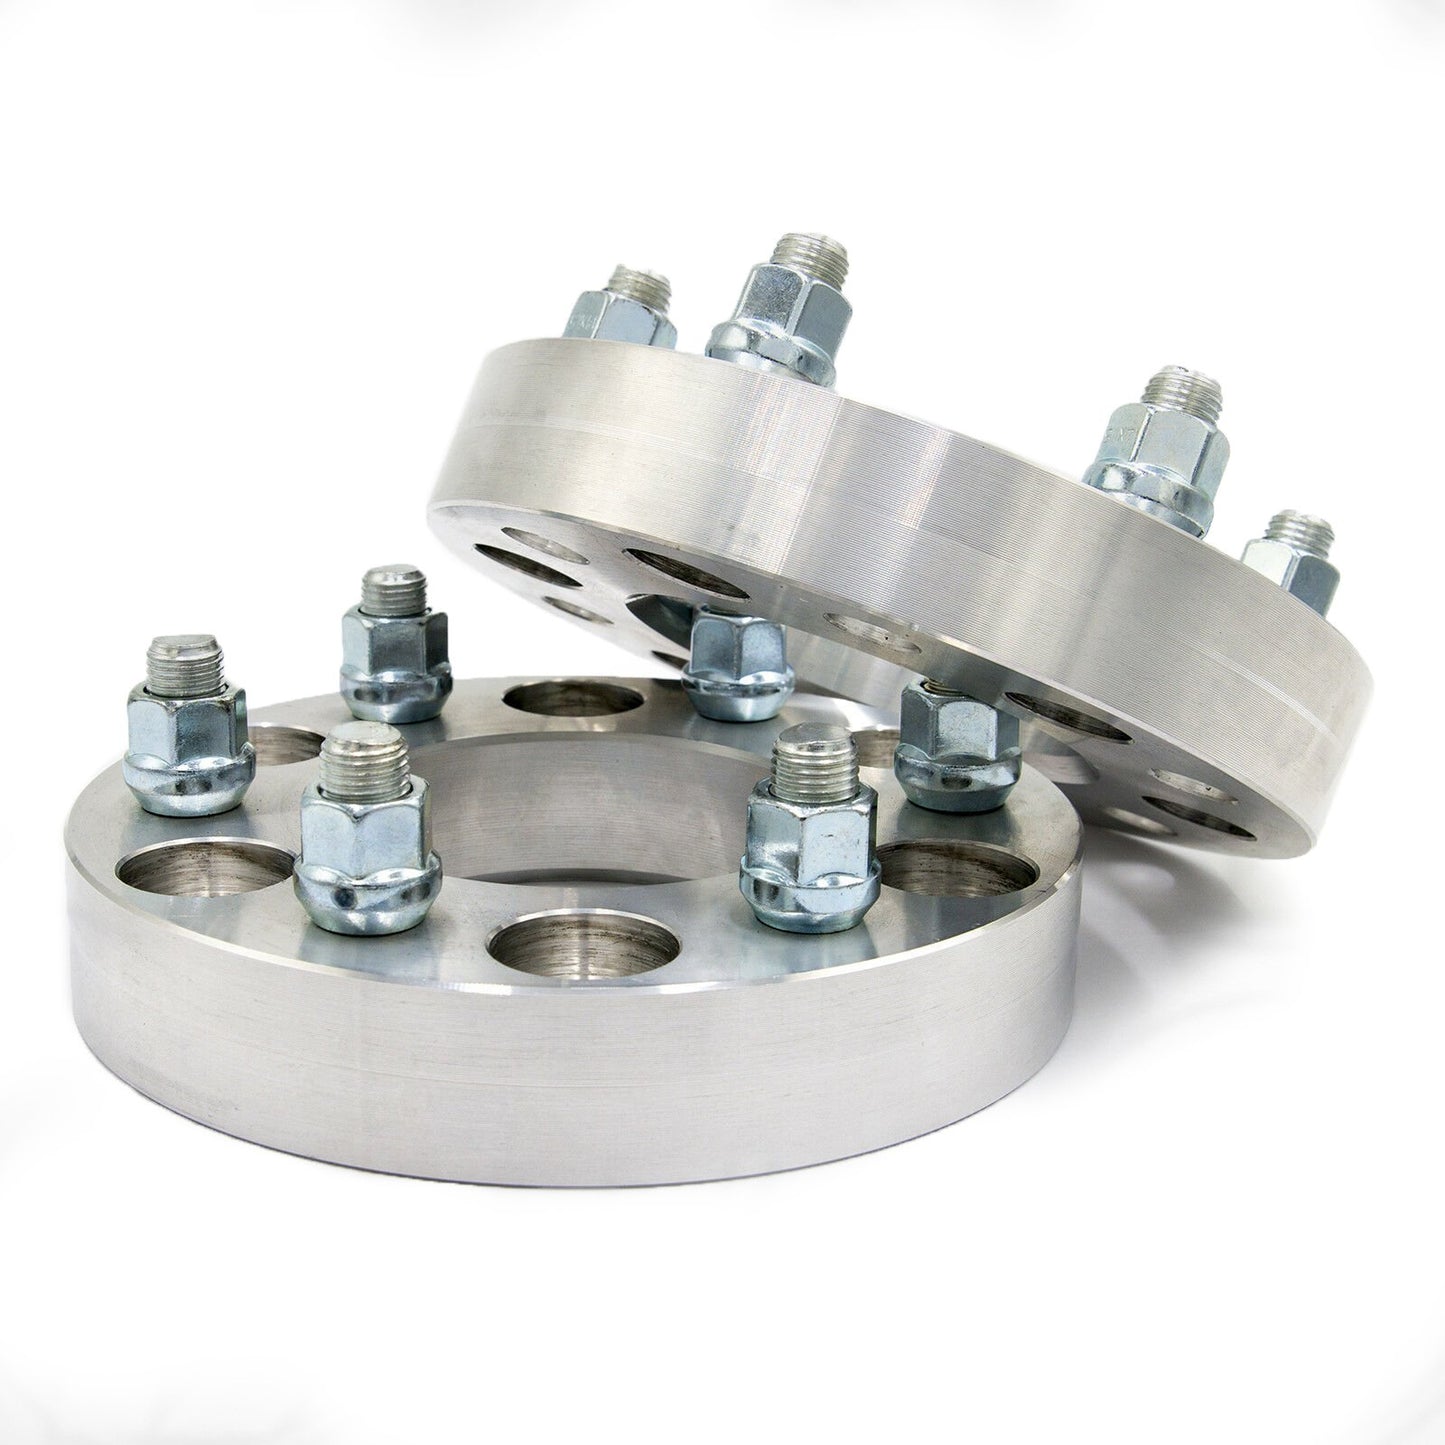 6x115 to 6x120 Wheel Spacer/Adapter - Thickness: 3/4"- 4"